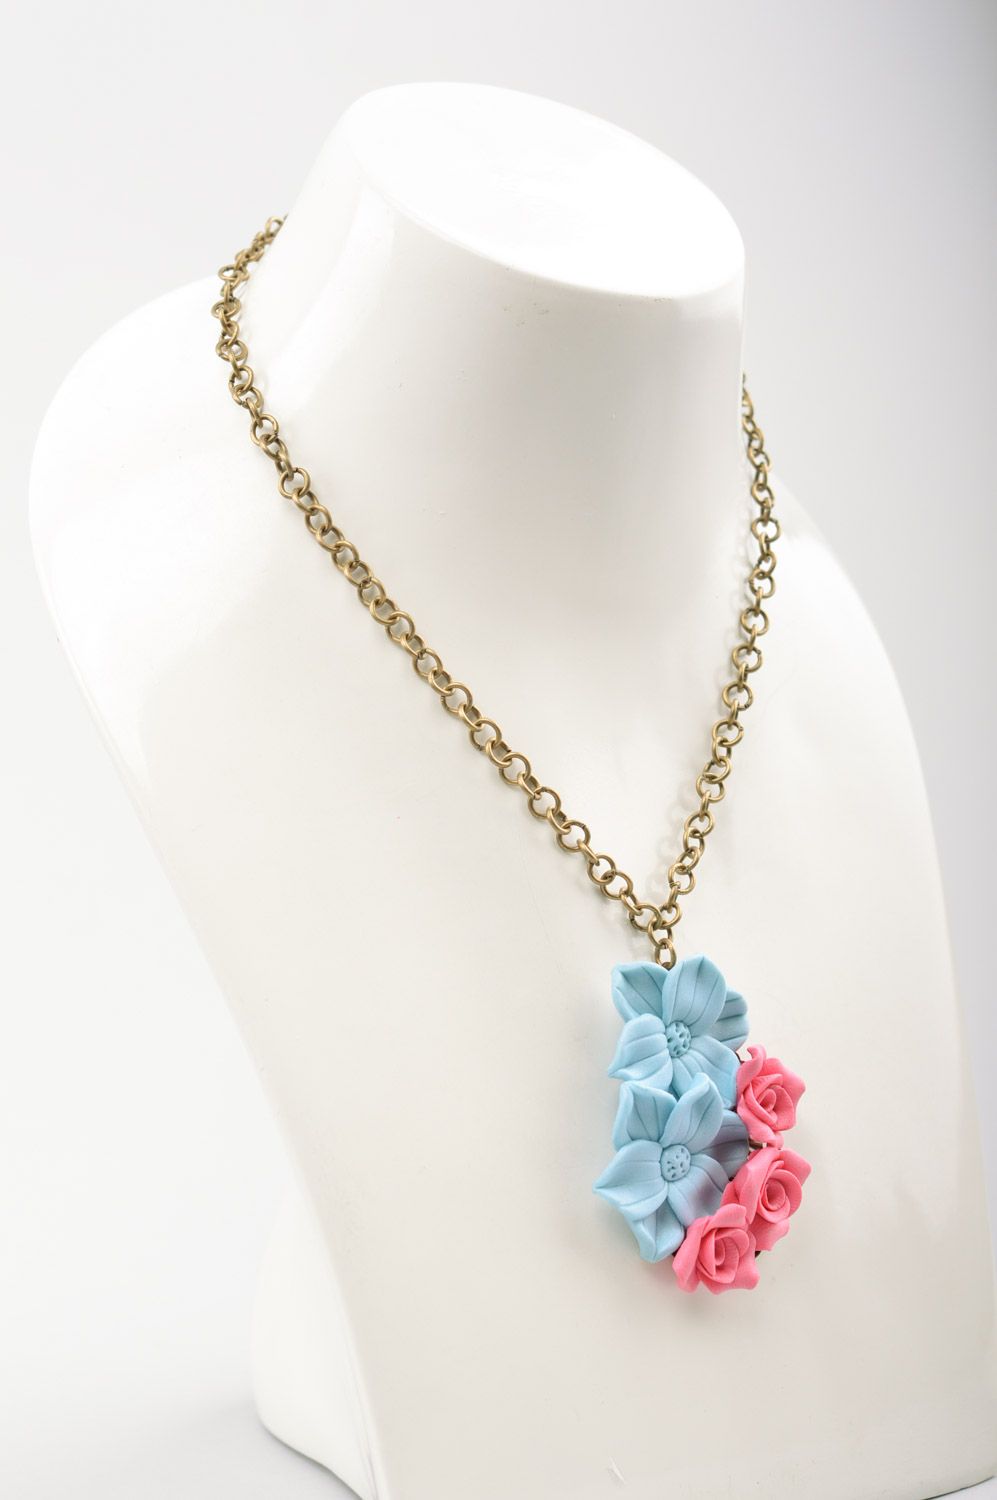 Homemade polymer clay flower neck pendant with metal chain photo 2